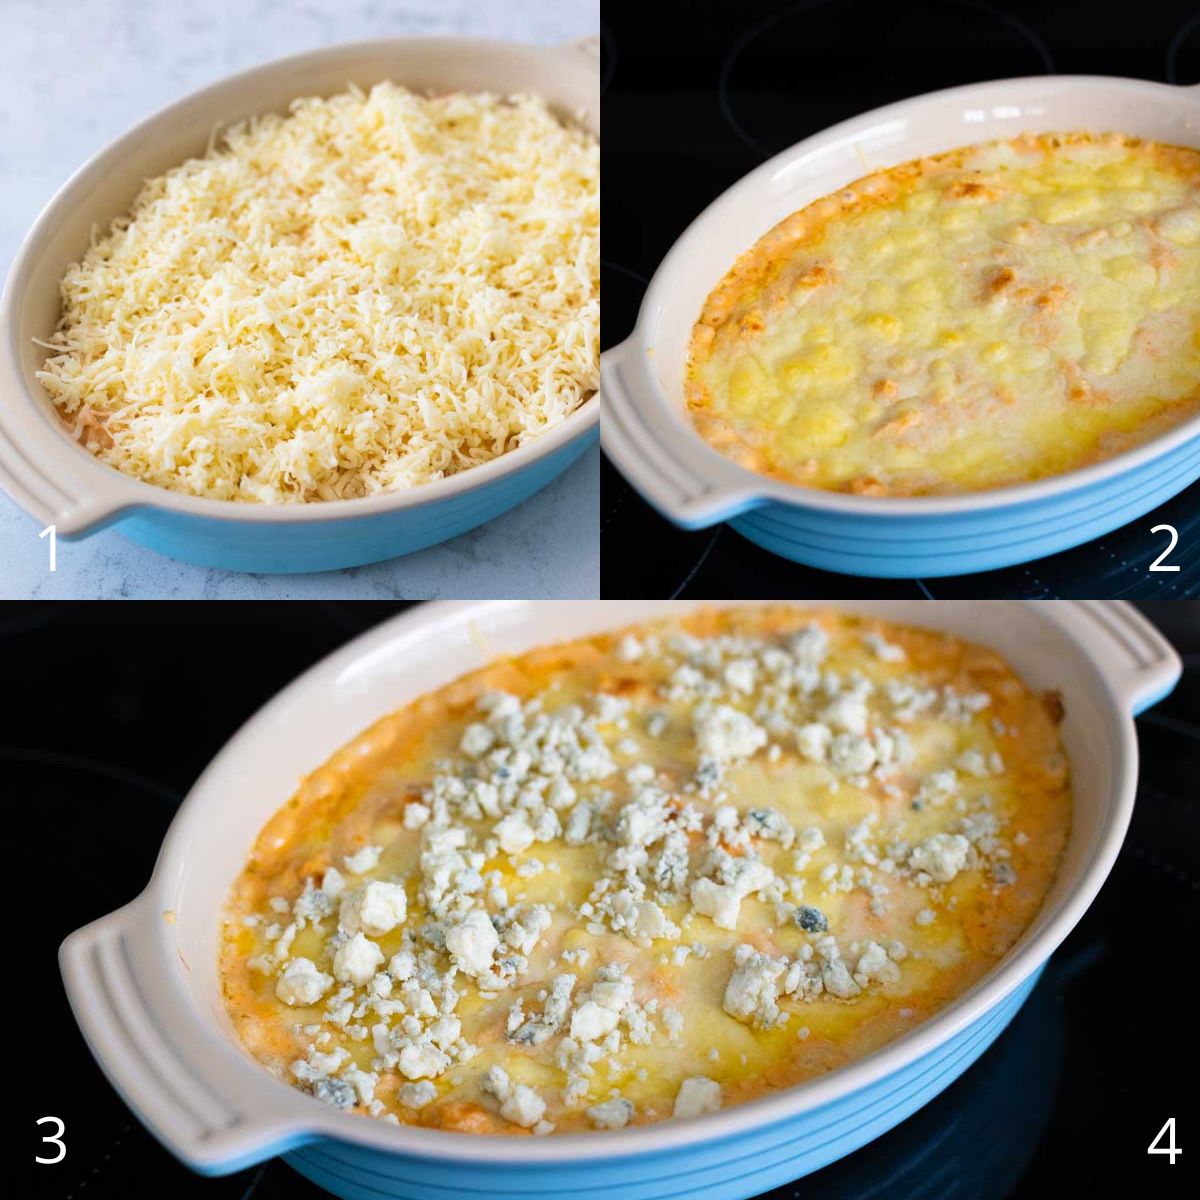 The step by step photos show how to layer the dip in a baking dish, cover it with cheese, and bake it.